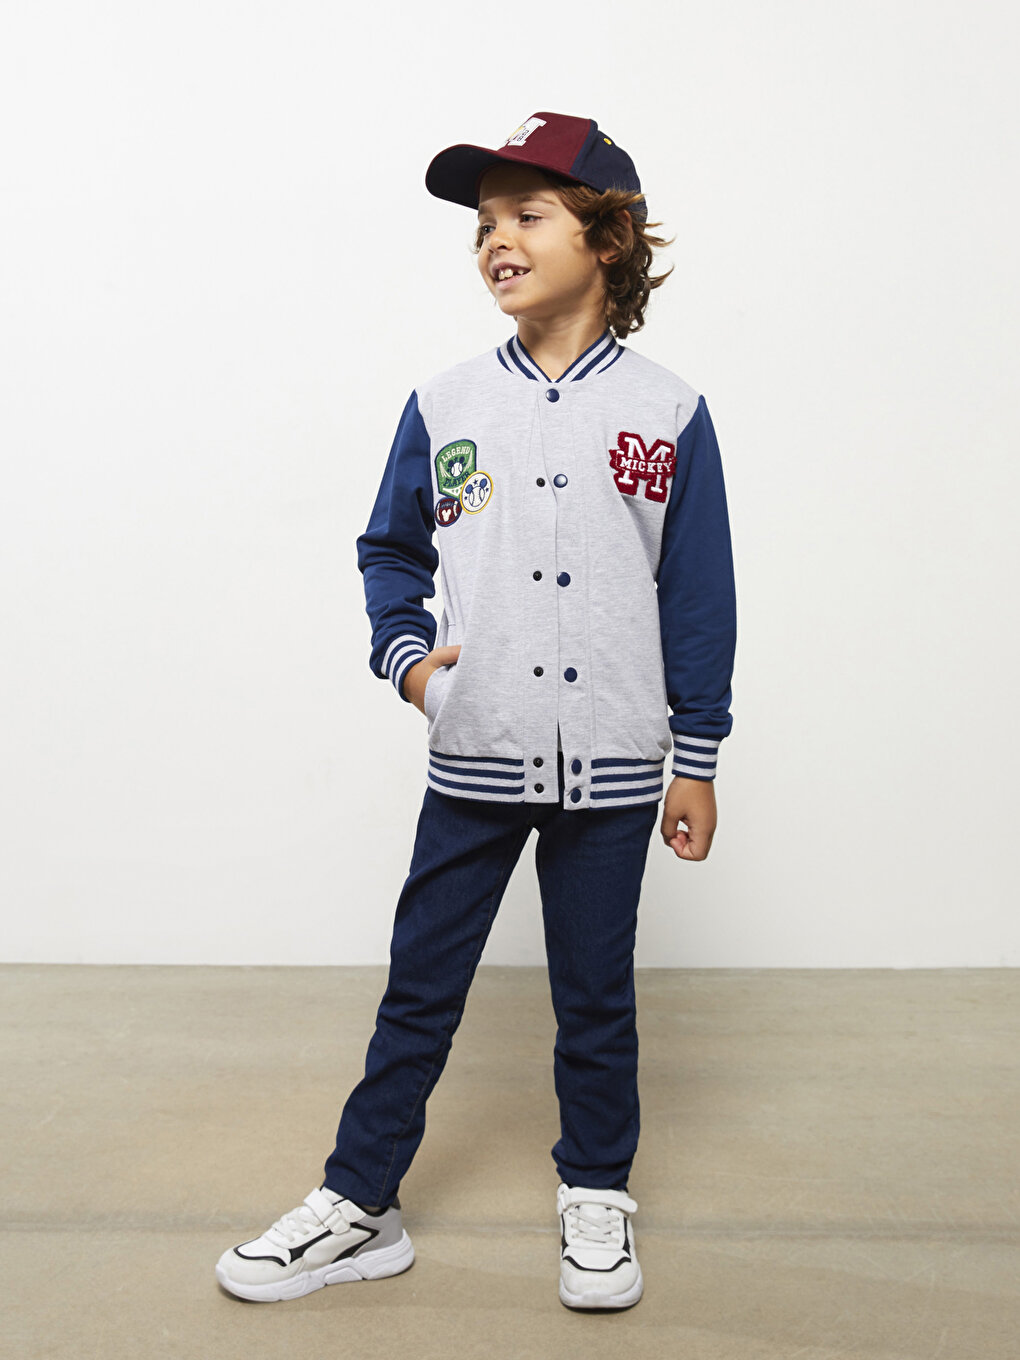 Mickey Mouse Embroidered Long Sleeve Boys College Jacket -W25660Z4-LAL -  W25660Z4-LAL - LC Waikiki